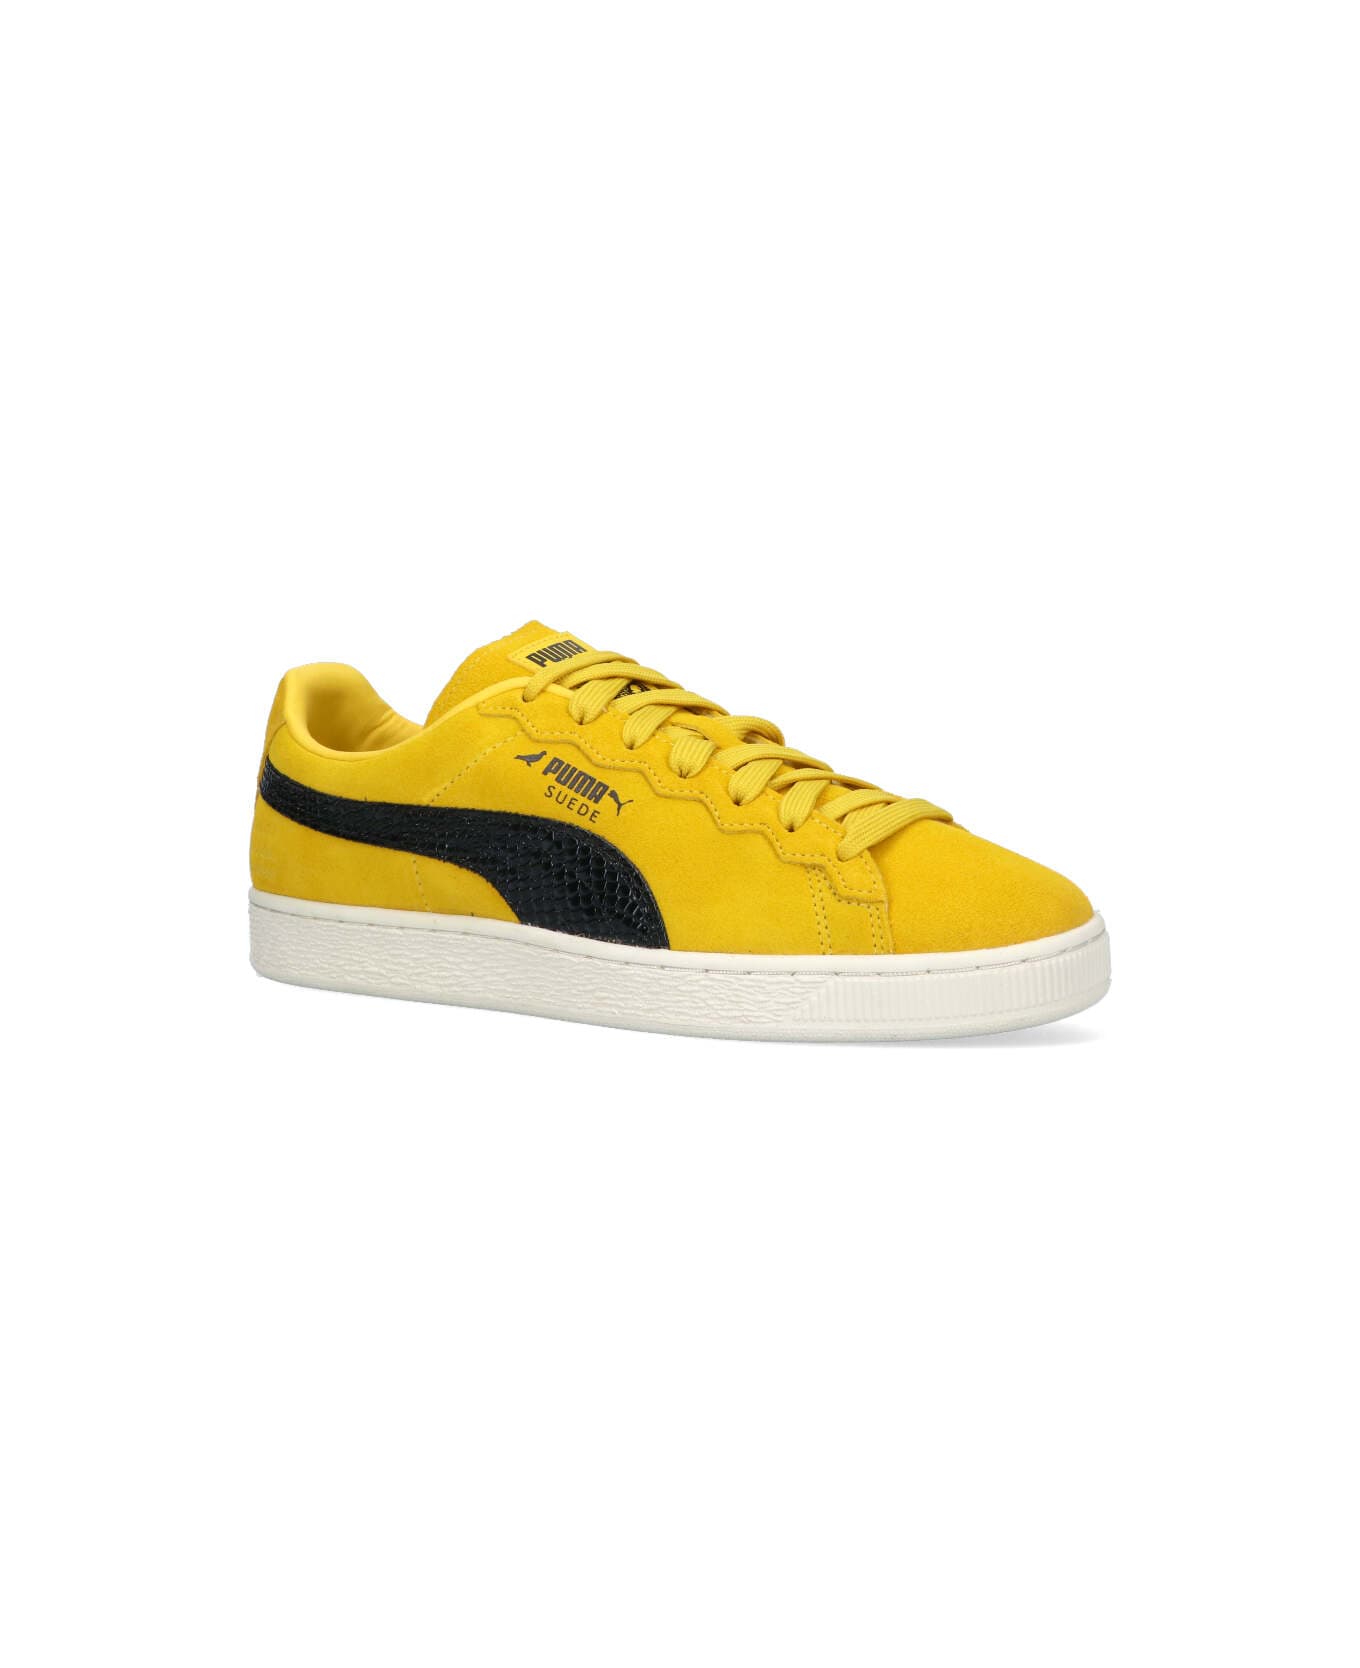 Puma X Staple Suede Low Sneakers - Yellow